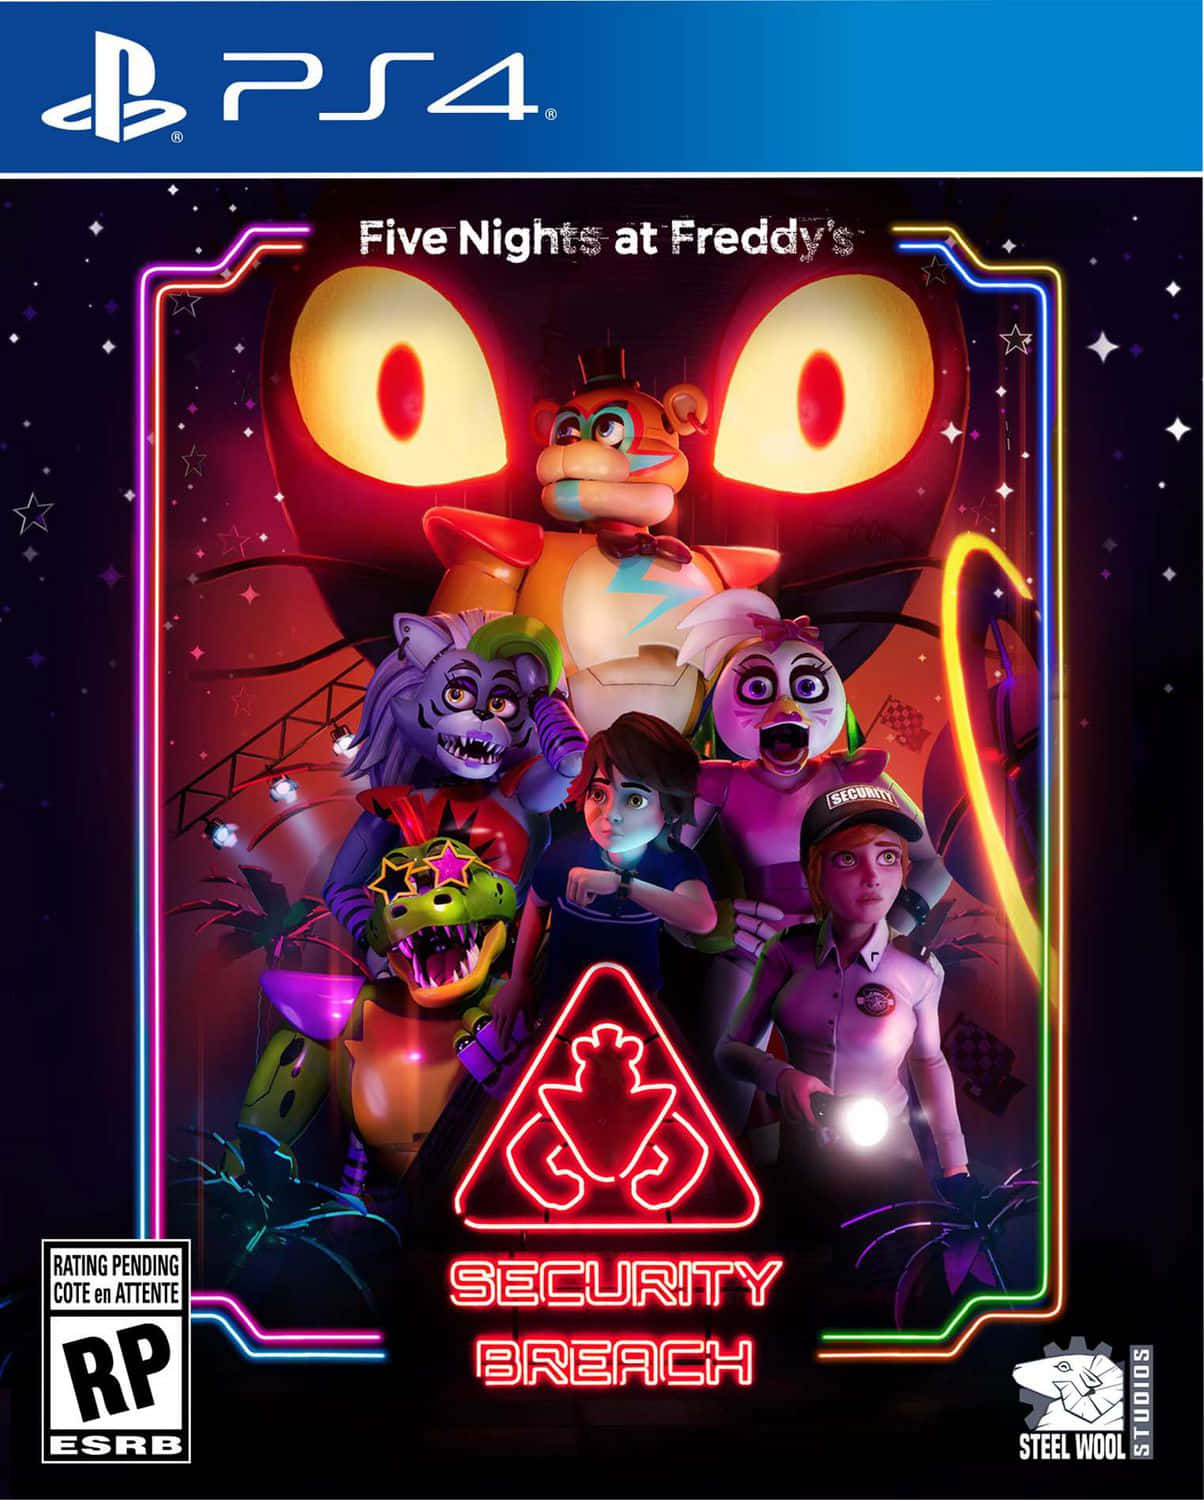 A Ps4 Cover For Five Nights At Freddy's Security Search